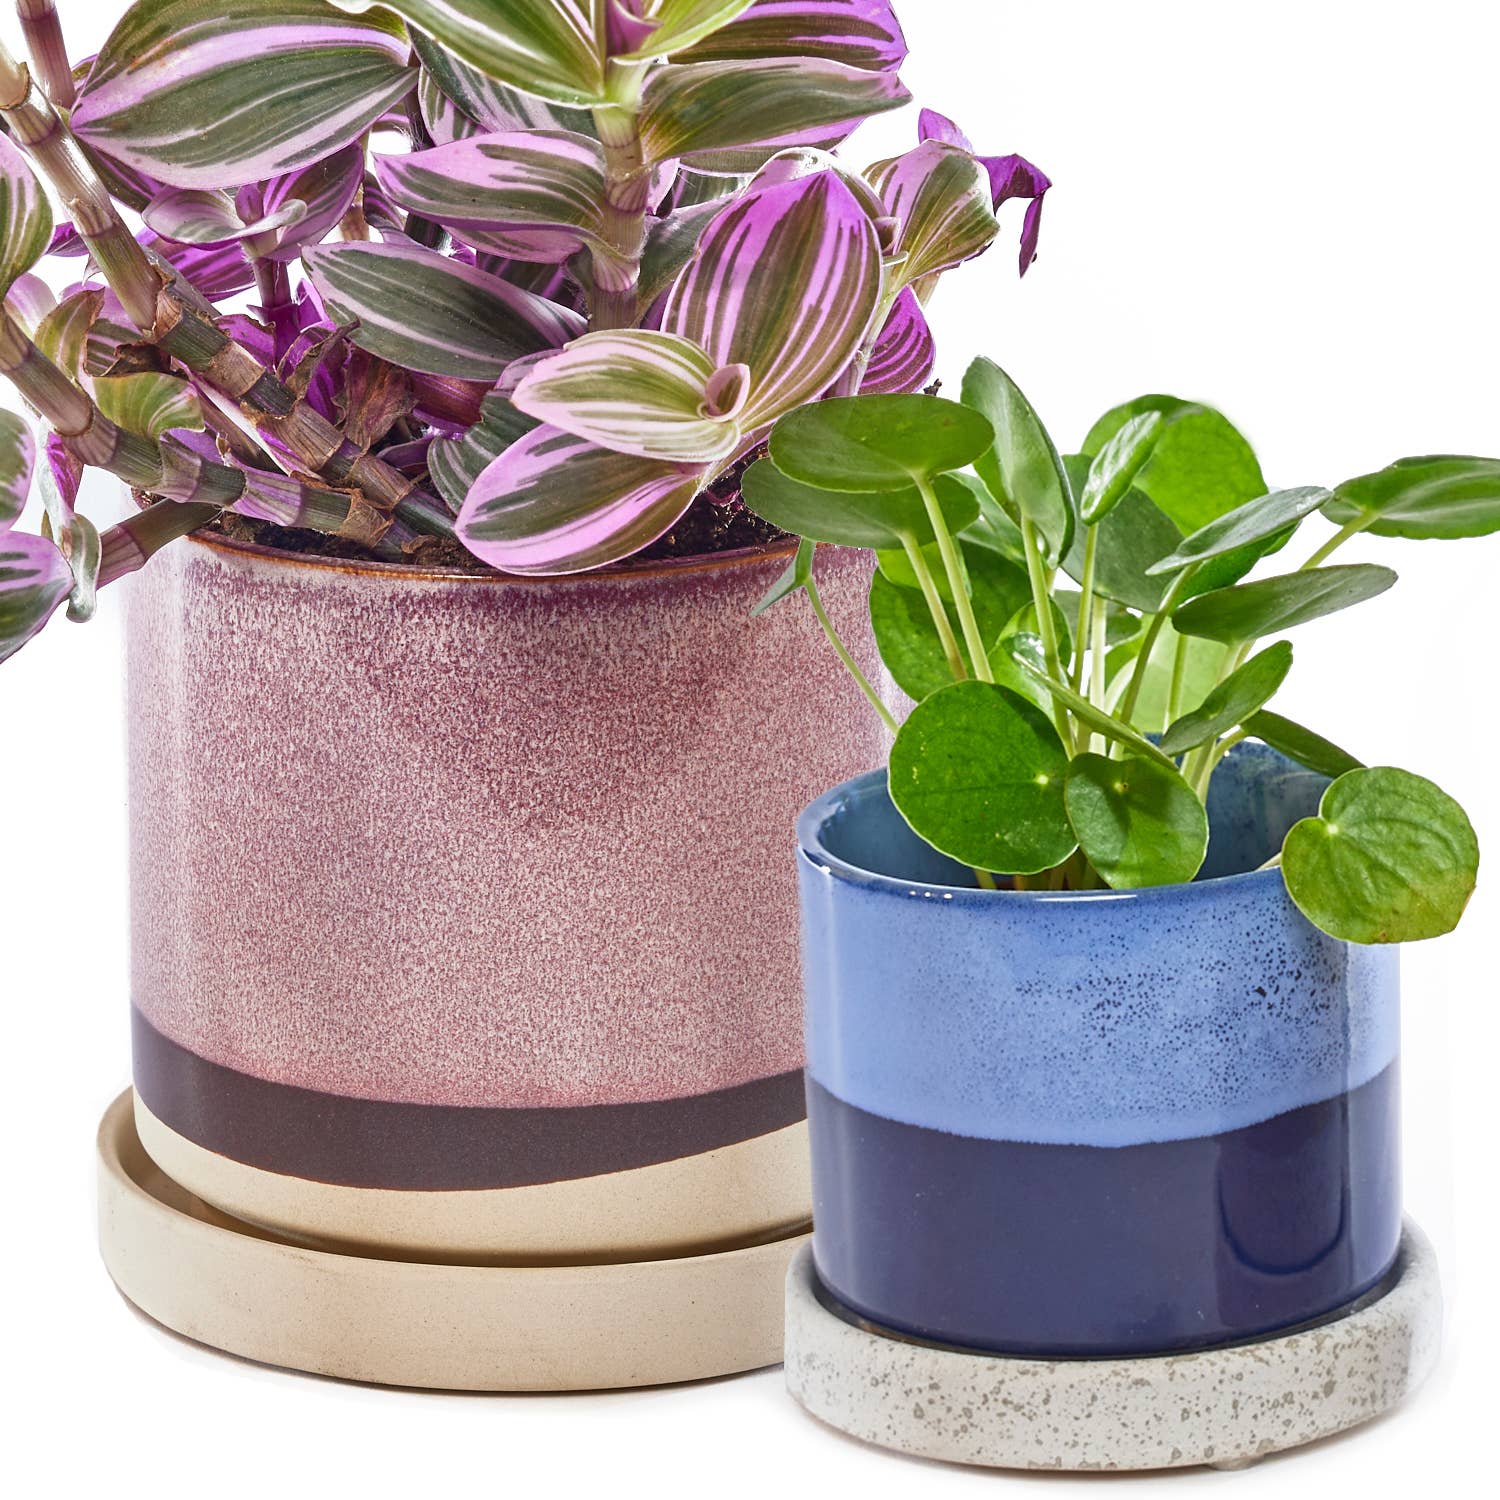 Chive - Minute Ceramic Plant Pots Indoor: Green Layers / 3"